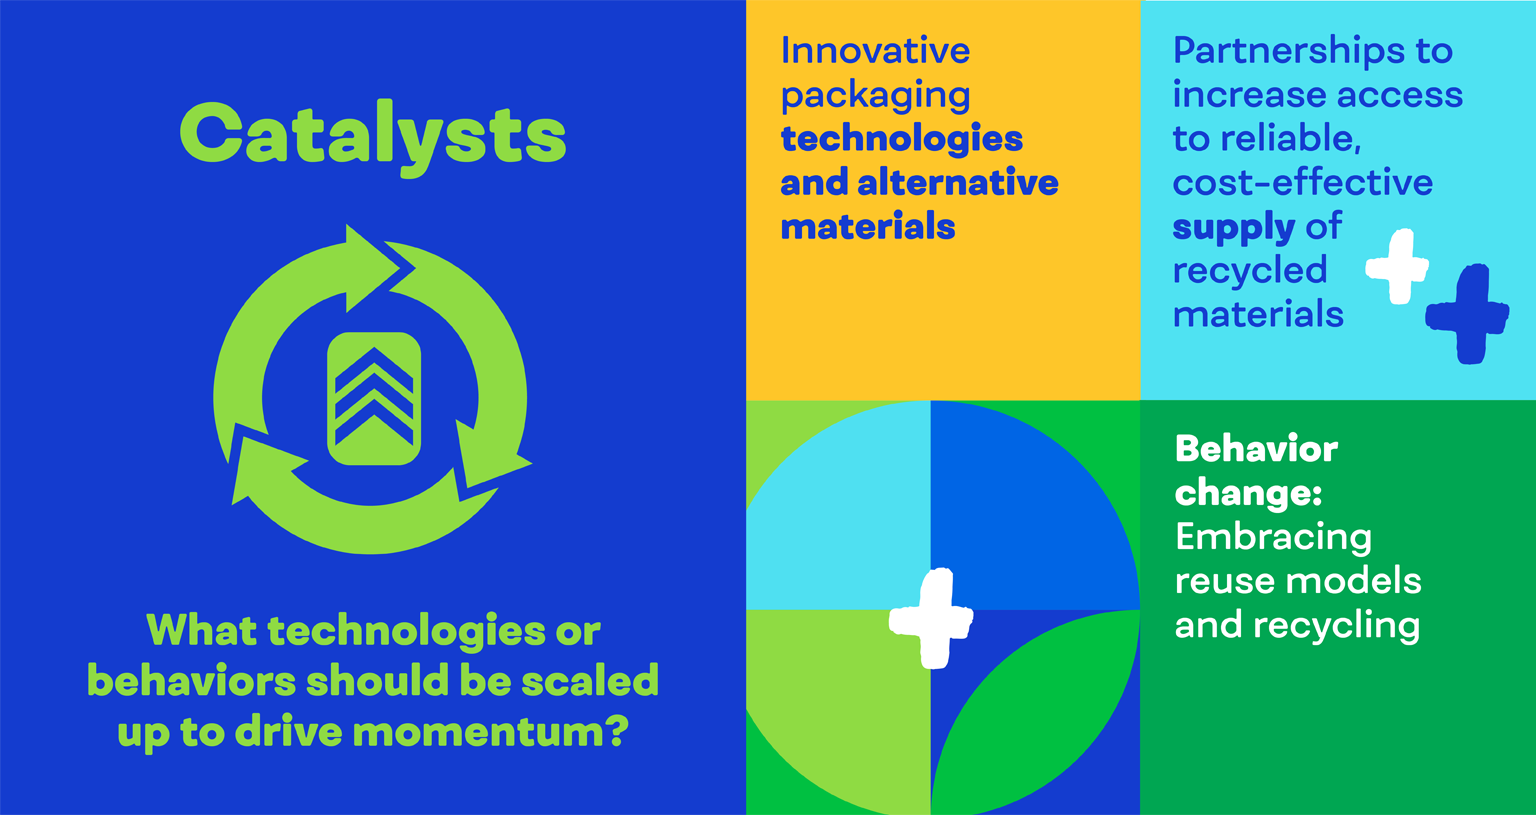 Catalysts: What technologies or behaviors should be scaled up to drive momentum?